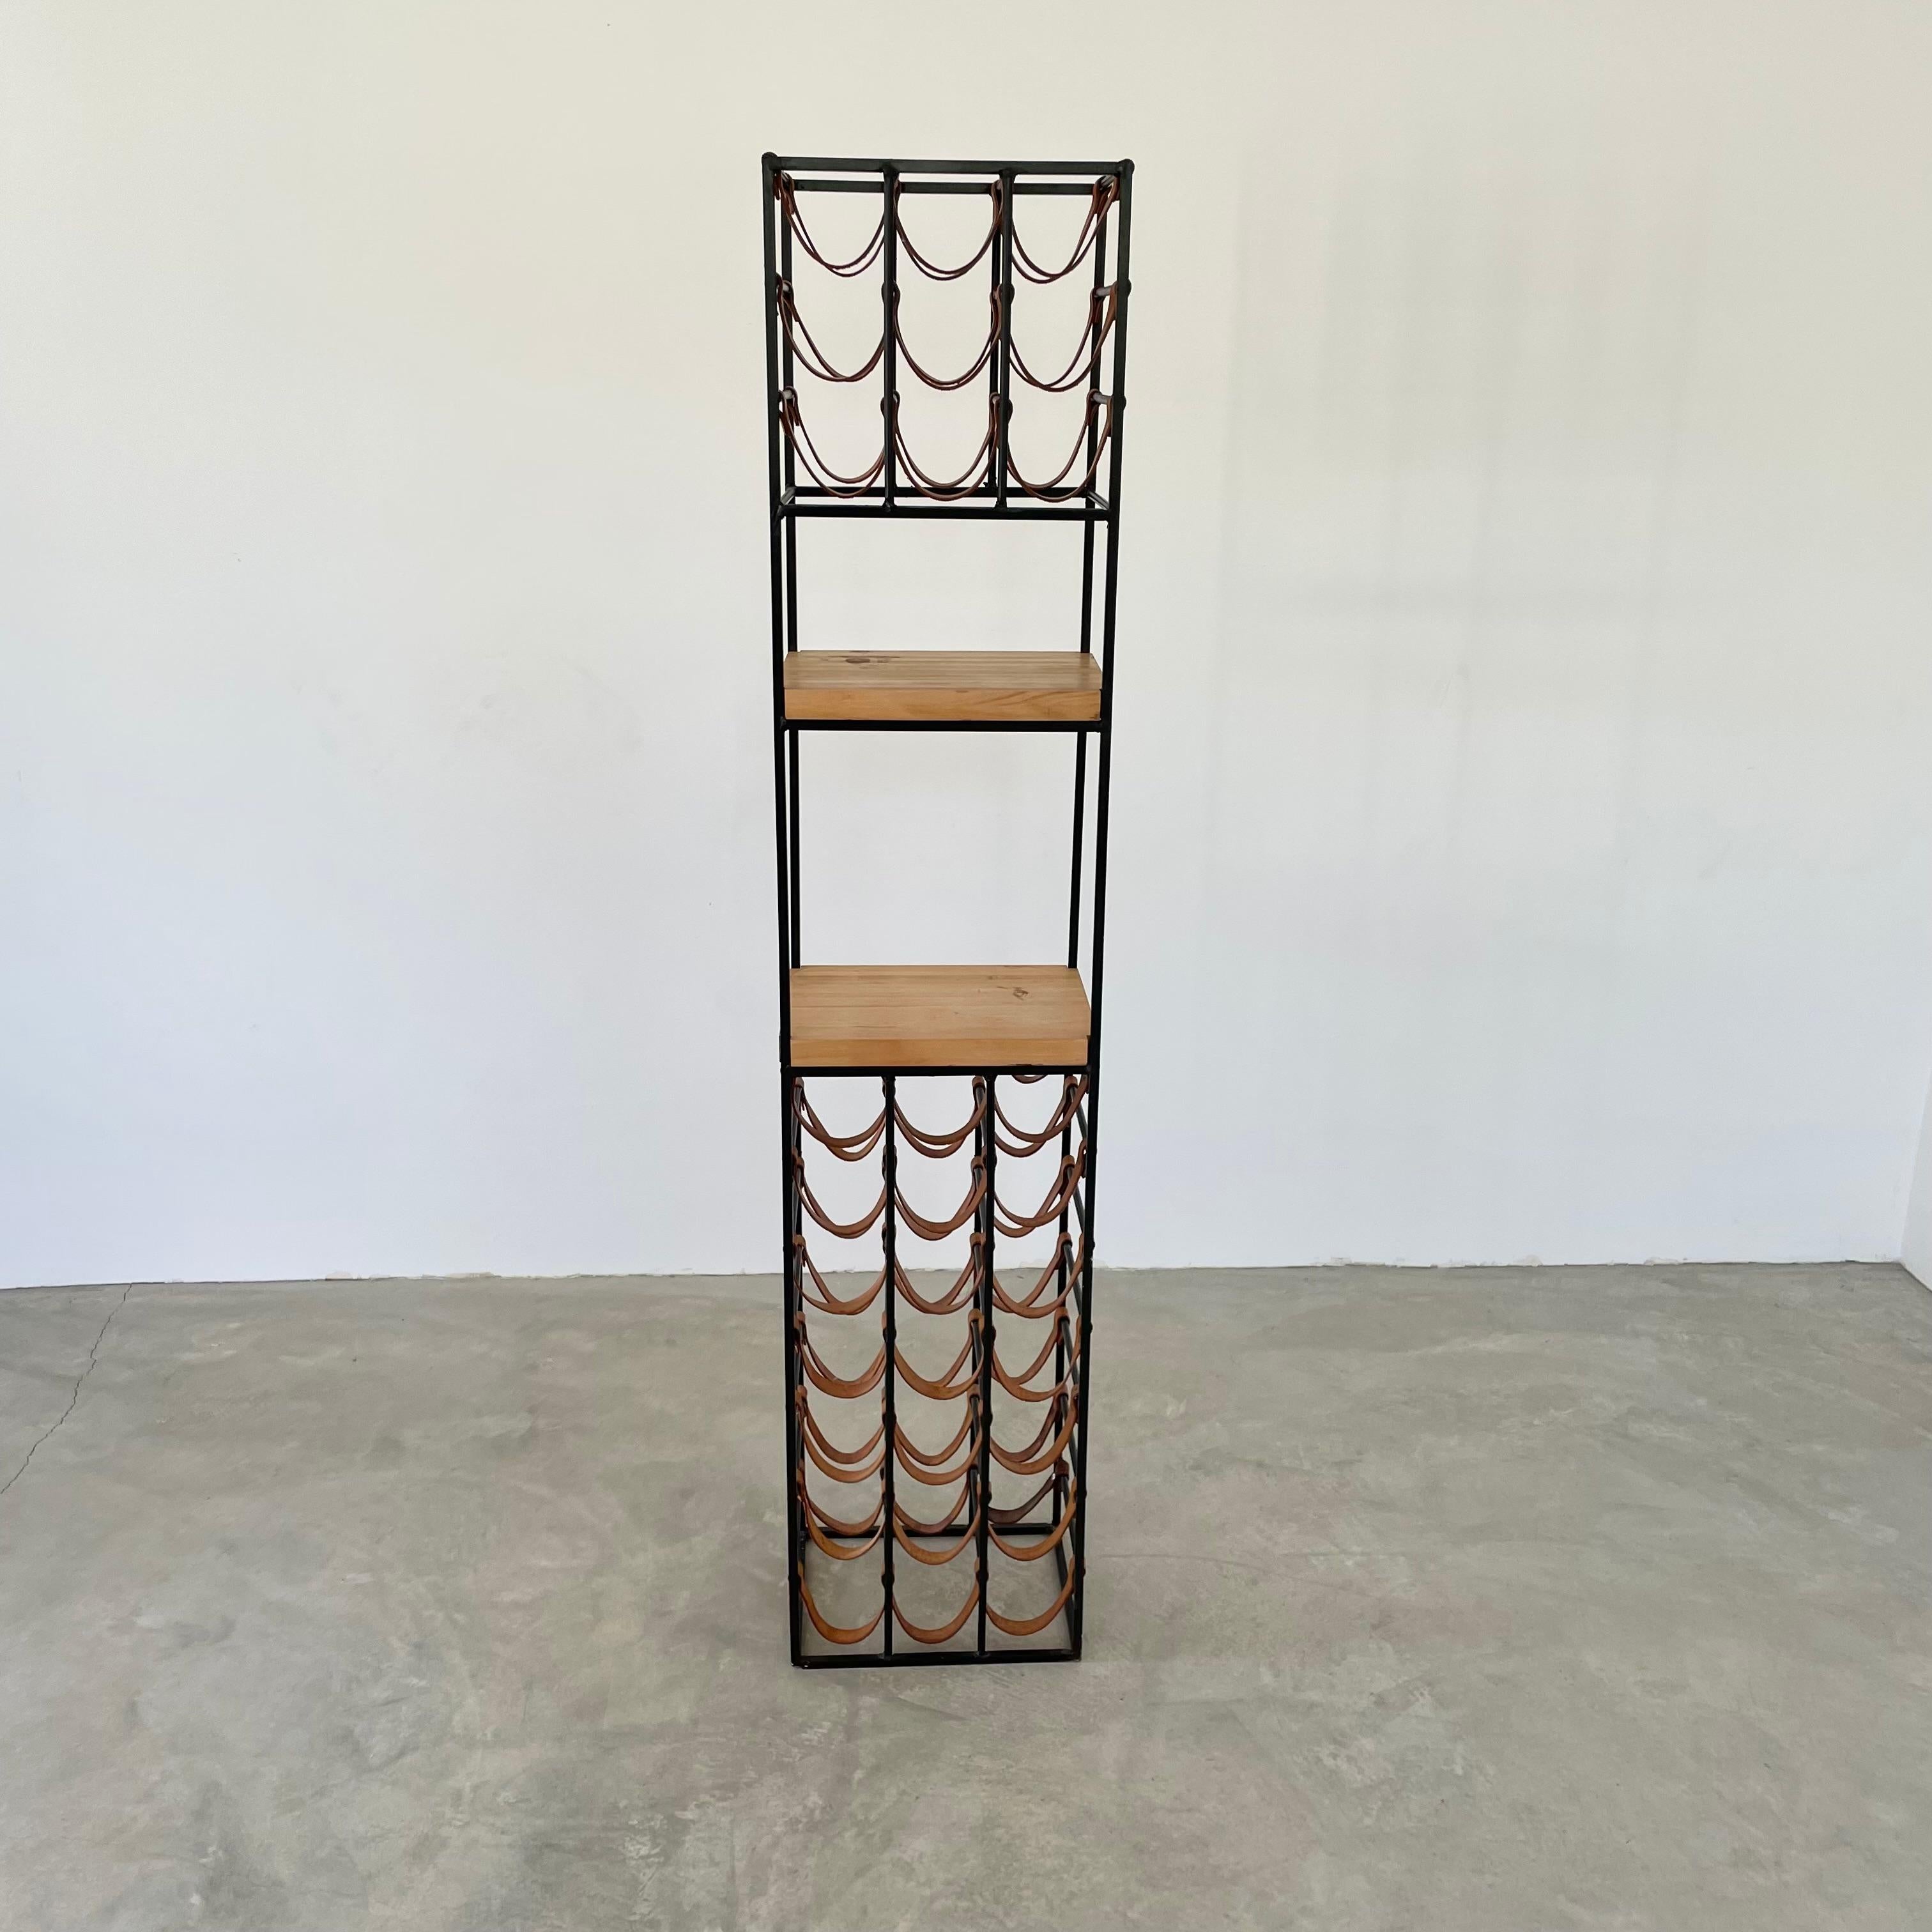 Gorgeous iron and leather wine rack by Arthur Umanoff. Solid iron frame with two butcher block shelves. Saddle leather straps hold 30 bottles. Lower shelf can hold an additional nine bottles comfortably. Great piece for your kitchen or dining room.